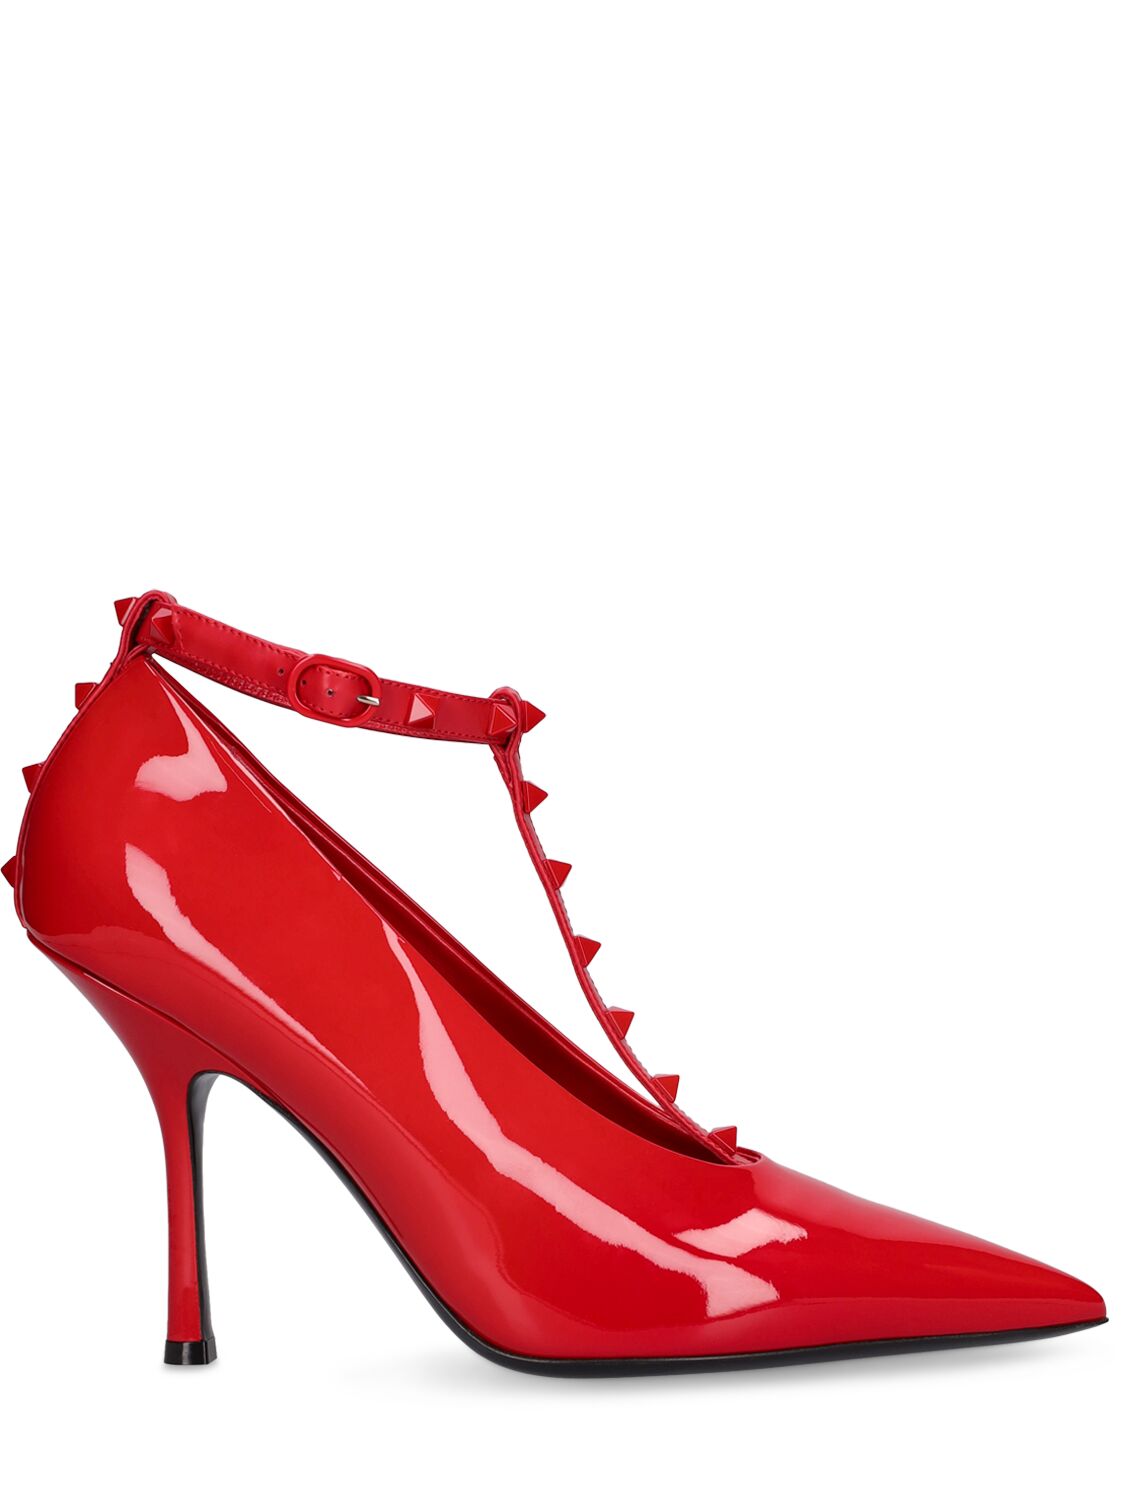 Valentino Garavani Women's Rockstud Patent Leather Pumps With Matching Studs 100mm In Rouge Pur